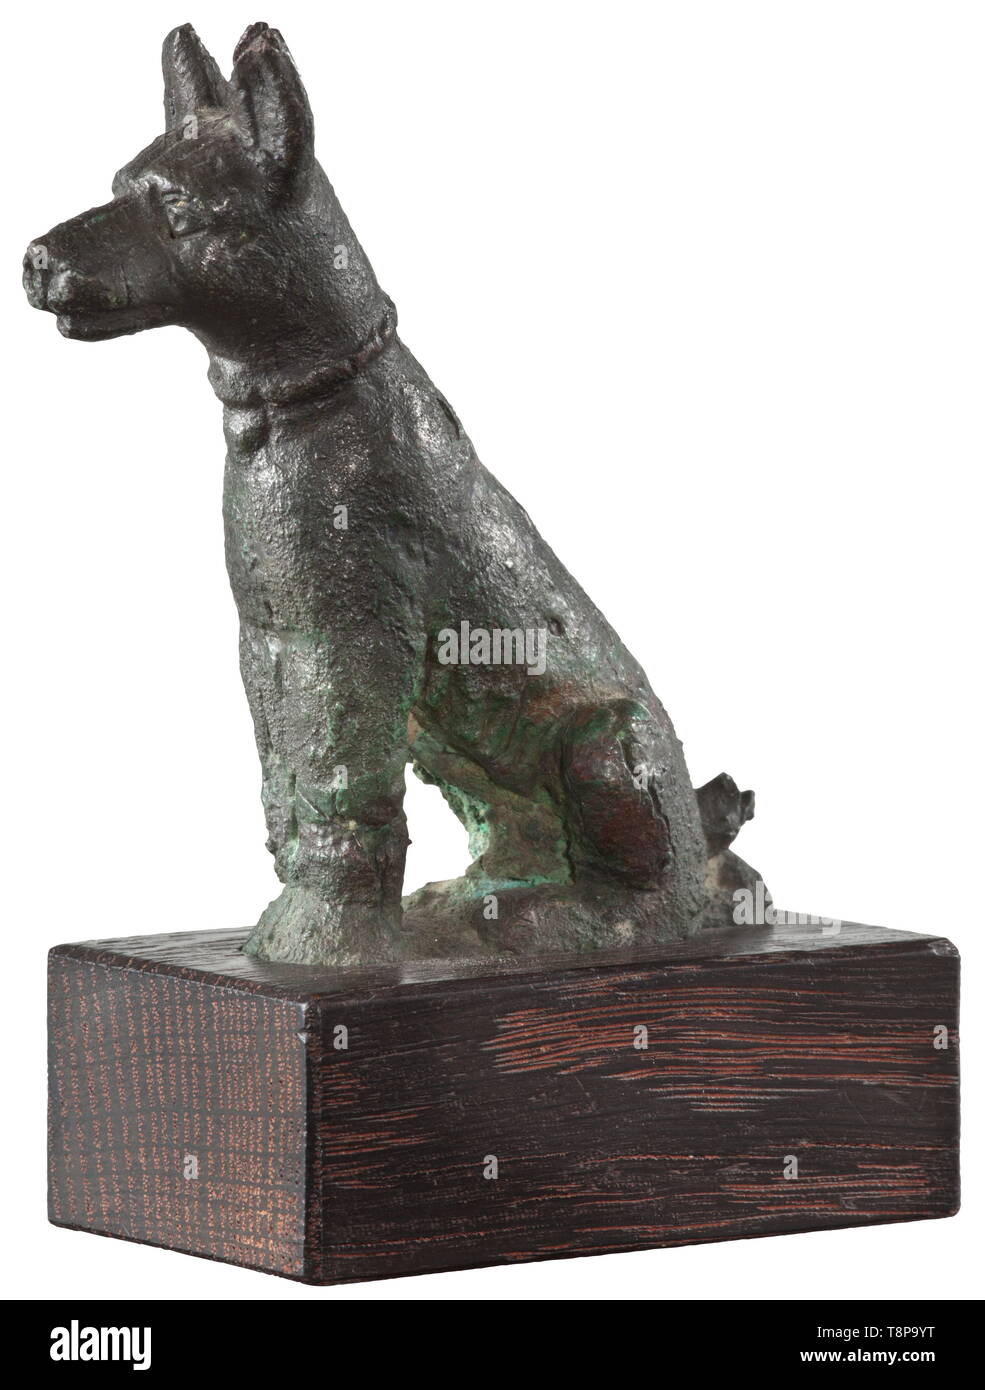 An ancient Egyptian bronze statue of Anubis as canid, late period, mid to late 1st millennium BC Figure of the god as sitting canid with a collar around his neck. Surface slightly corroded. Modern wood base. Height without base 7.5 cm. Provenance: 1970s private collection from the Munich area. historic, historical, ancient world, Additional-Rights-Clearance-Info-Not-Available Stock Photo